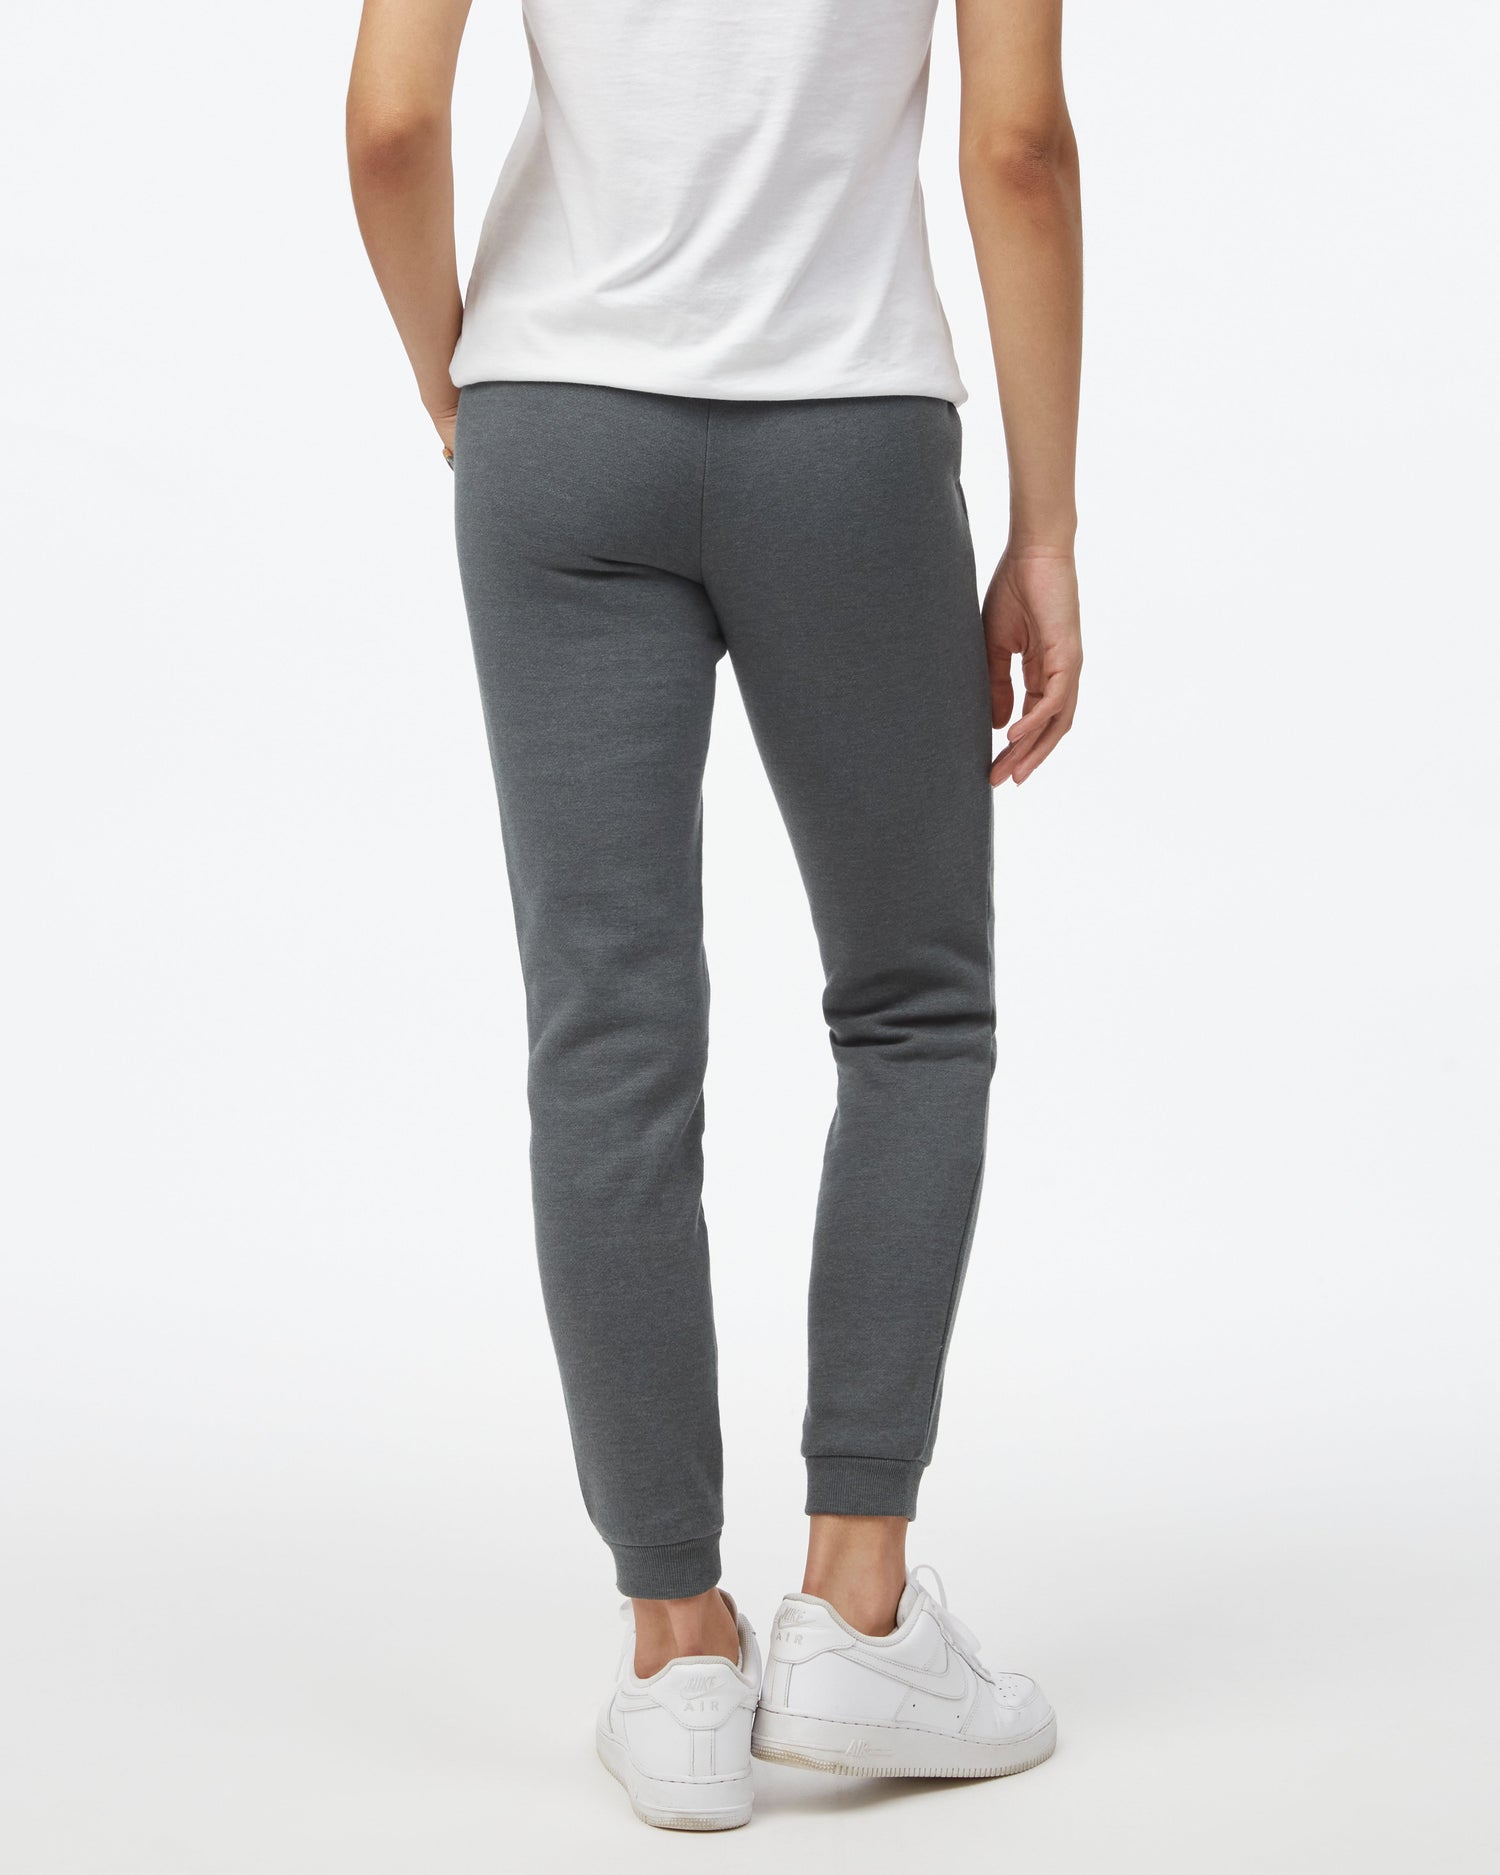 Tentree W's Bamone Sweatpant - Made From Recycled Polyester & Organic Cotton Urban Green Heather Pants